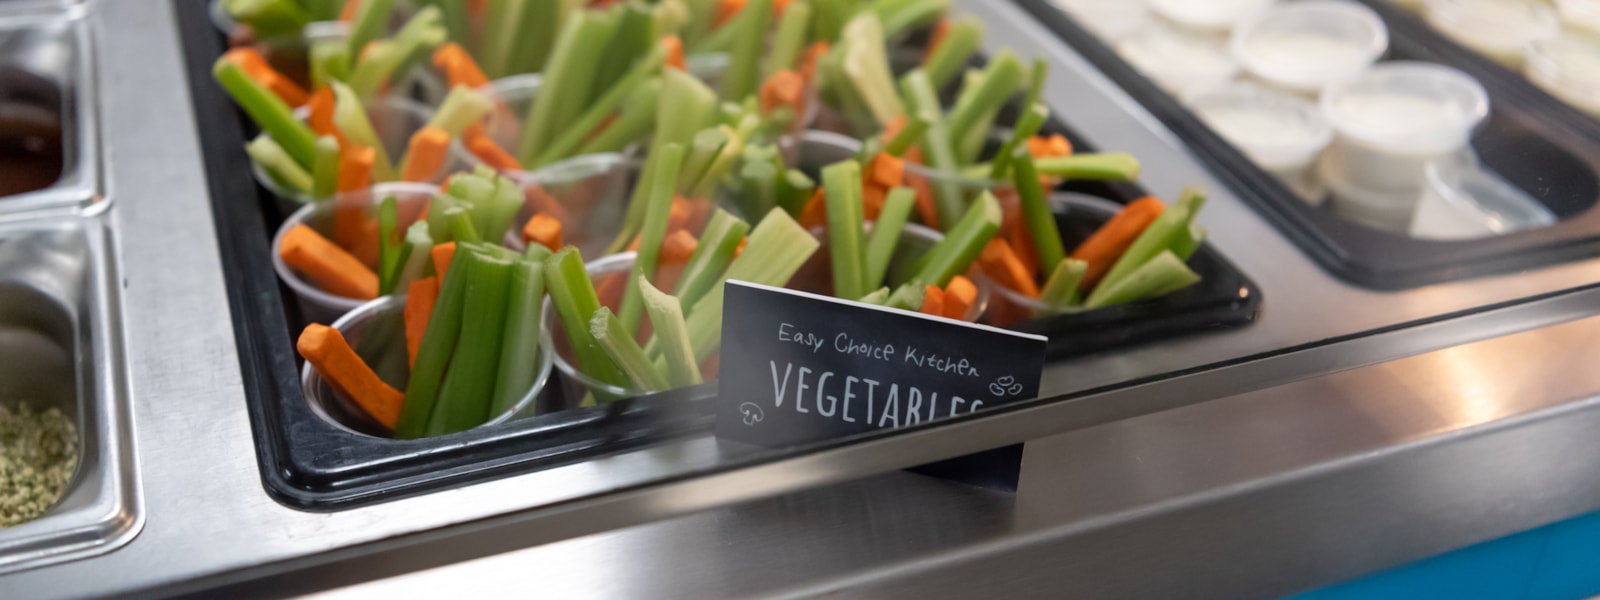 Veggies displayed for students to eat.